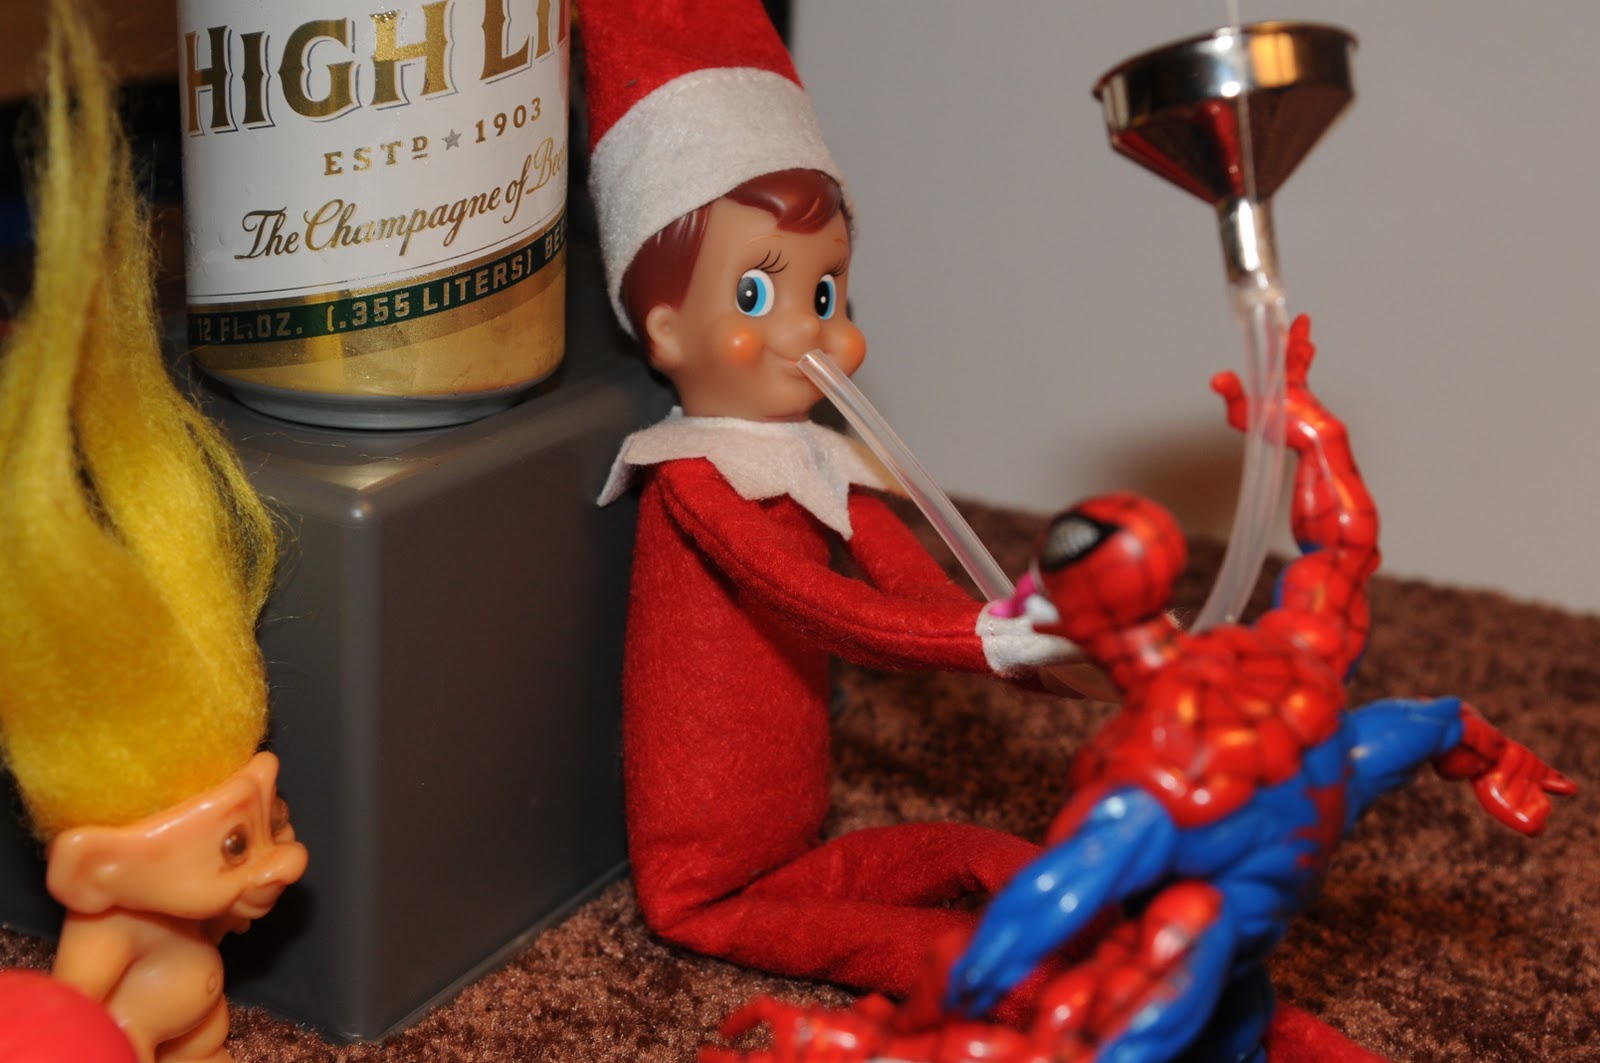 Legend has it that the Elf on the Shelf is a secret scout sent directly fro...